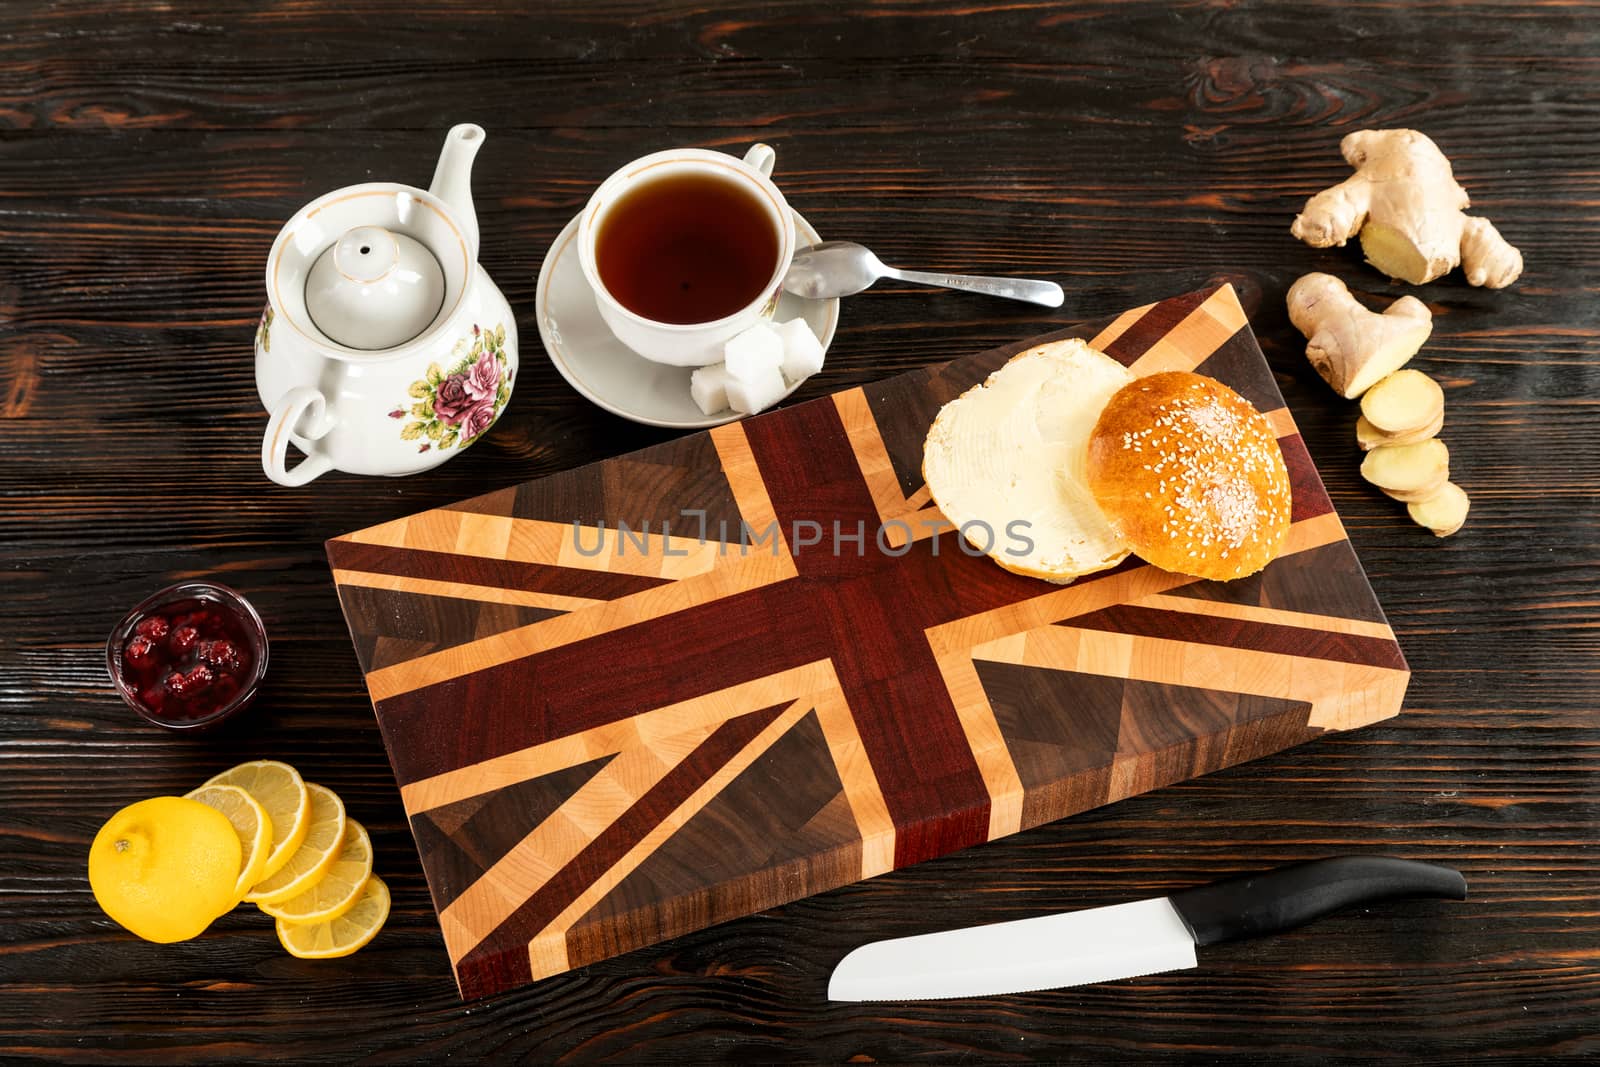 Cup of tea, sliced lemon and a bun on a cutting board by sveter